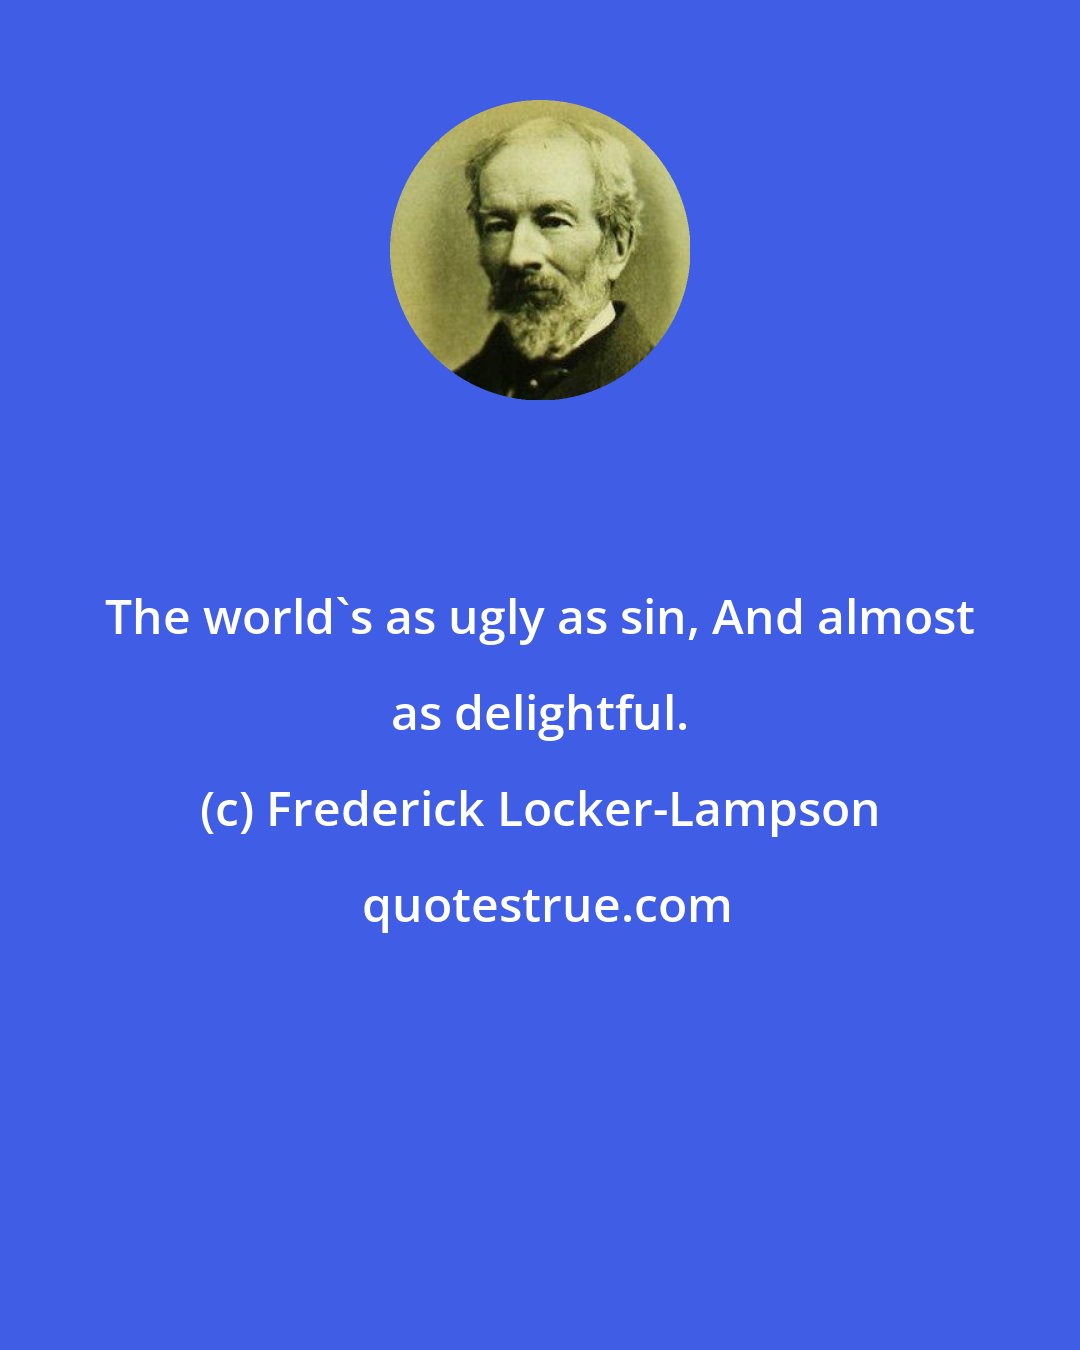 Frederick Locker-Lampson: The world's as ugly as sin, And almost as delightful.